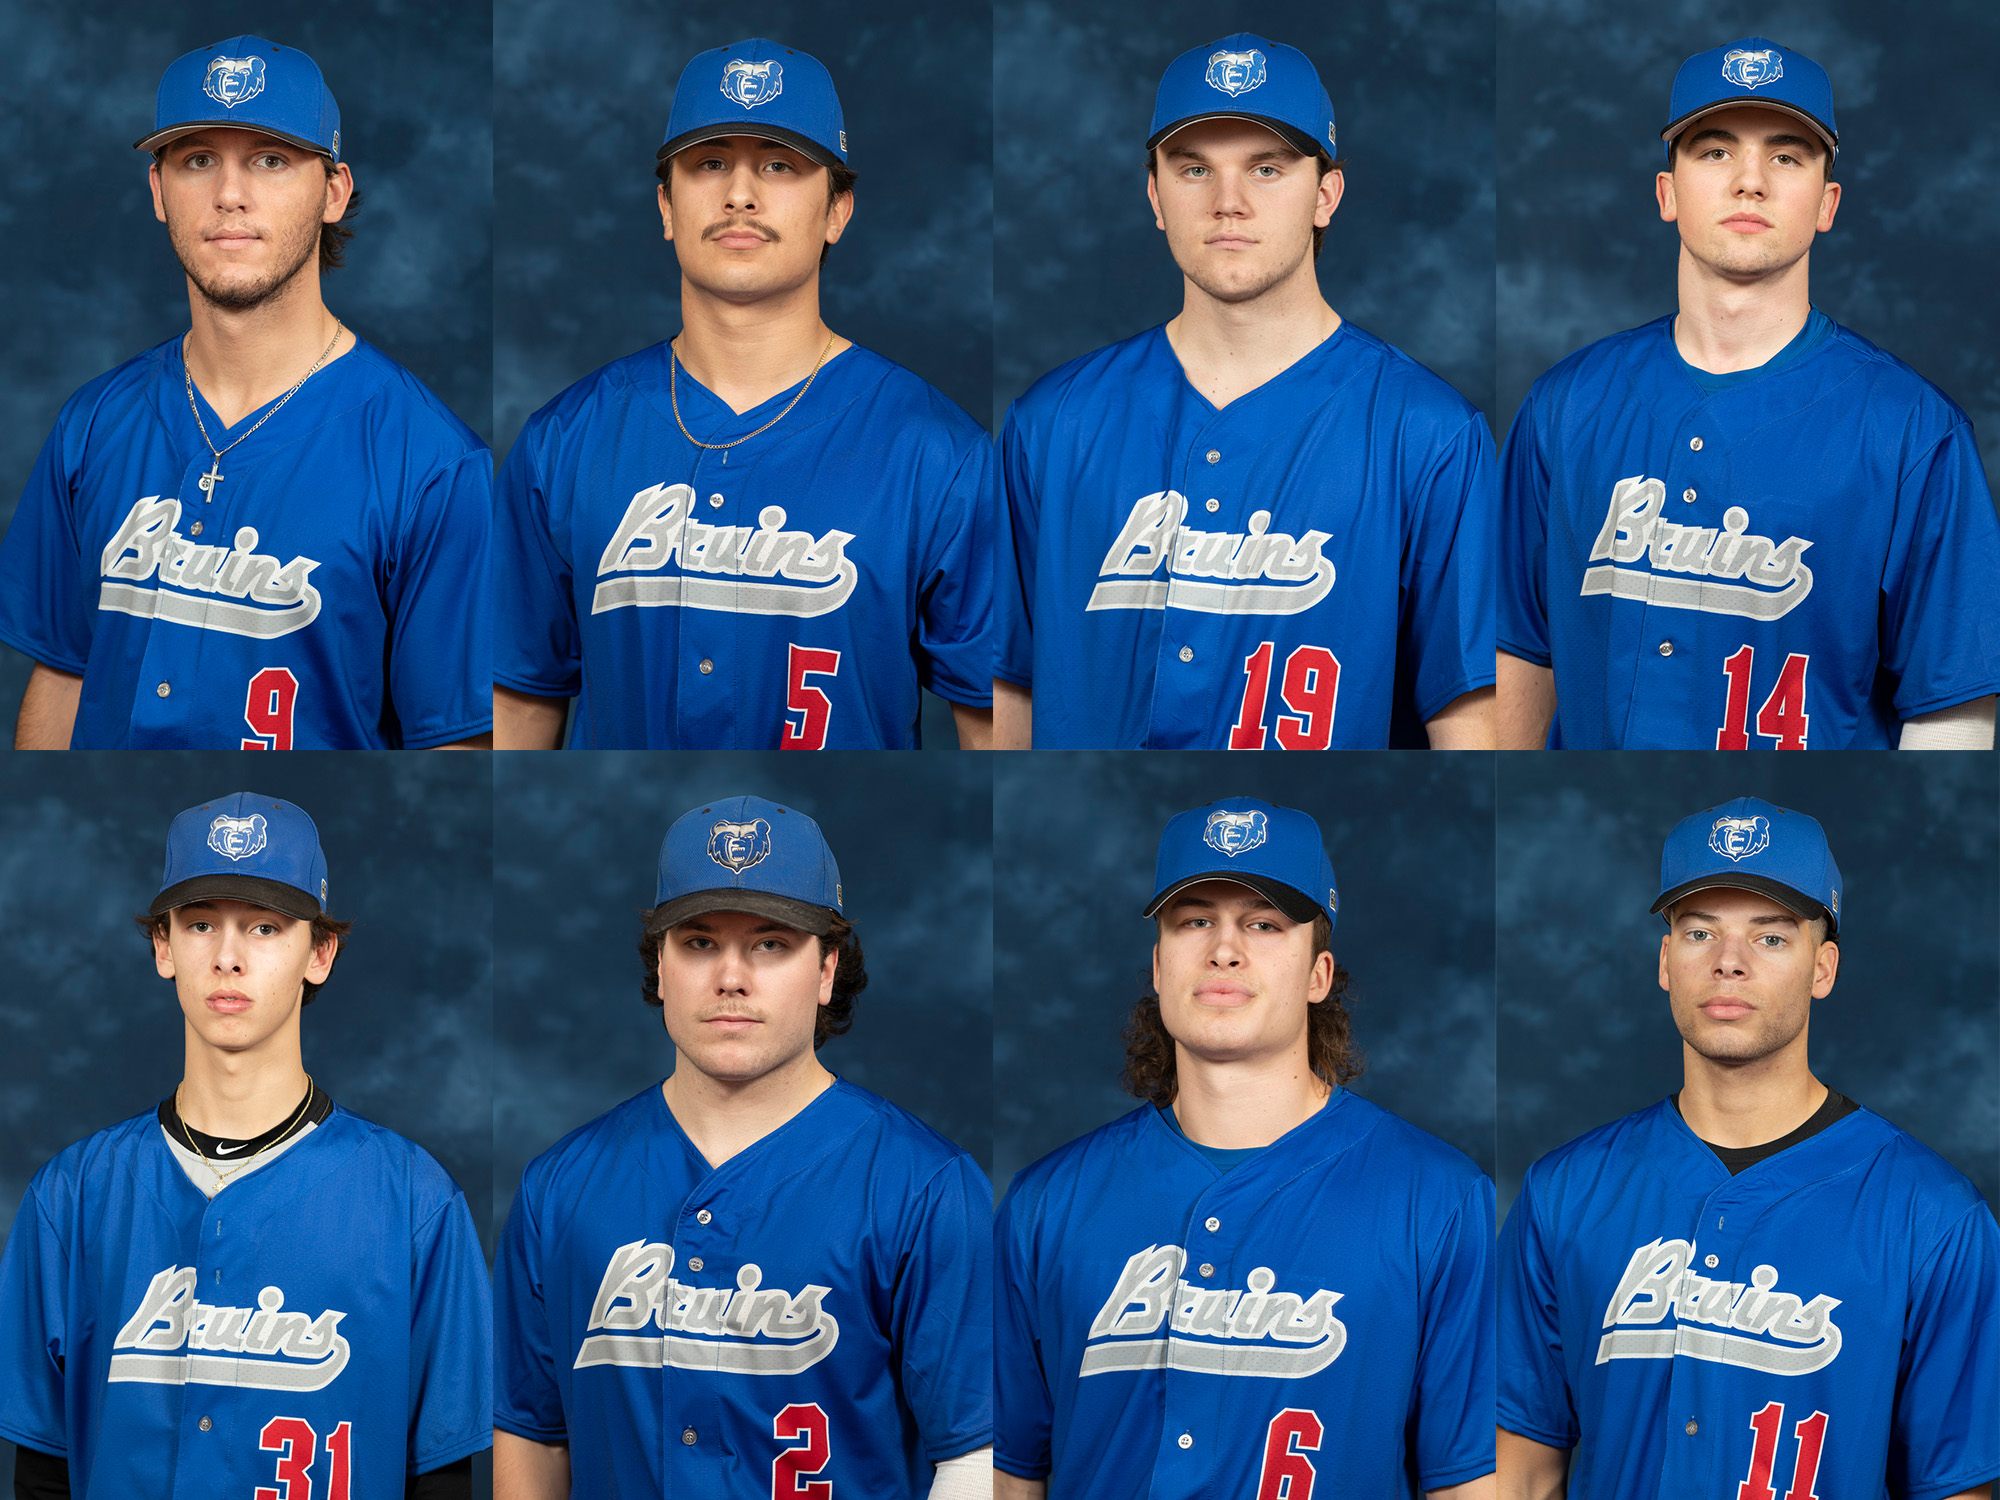 Pictured, in the top row, from left to right, are Keegan Batka, Hilario DeLaPaz, James Geshel and Jackson Kitchen. In the bottom row, from left to right, are Sean Knorr, Tate Peterson, Ashton Potts and RJ Sherwood.